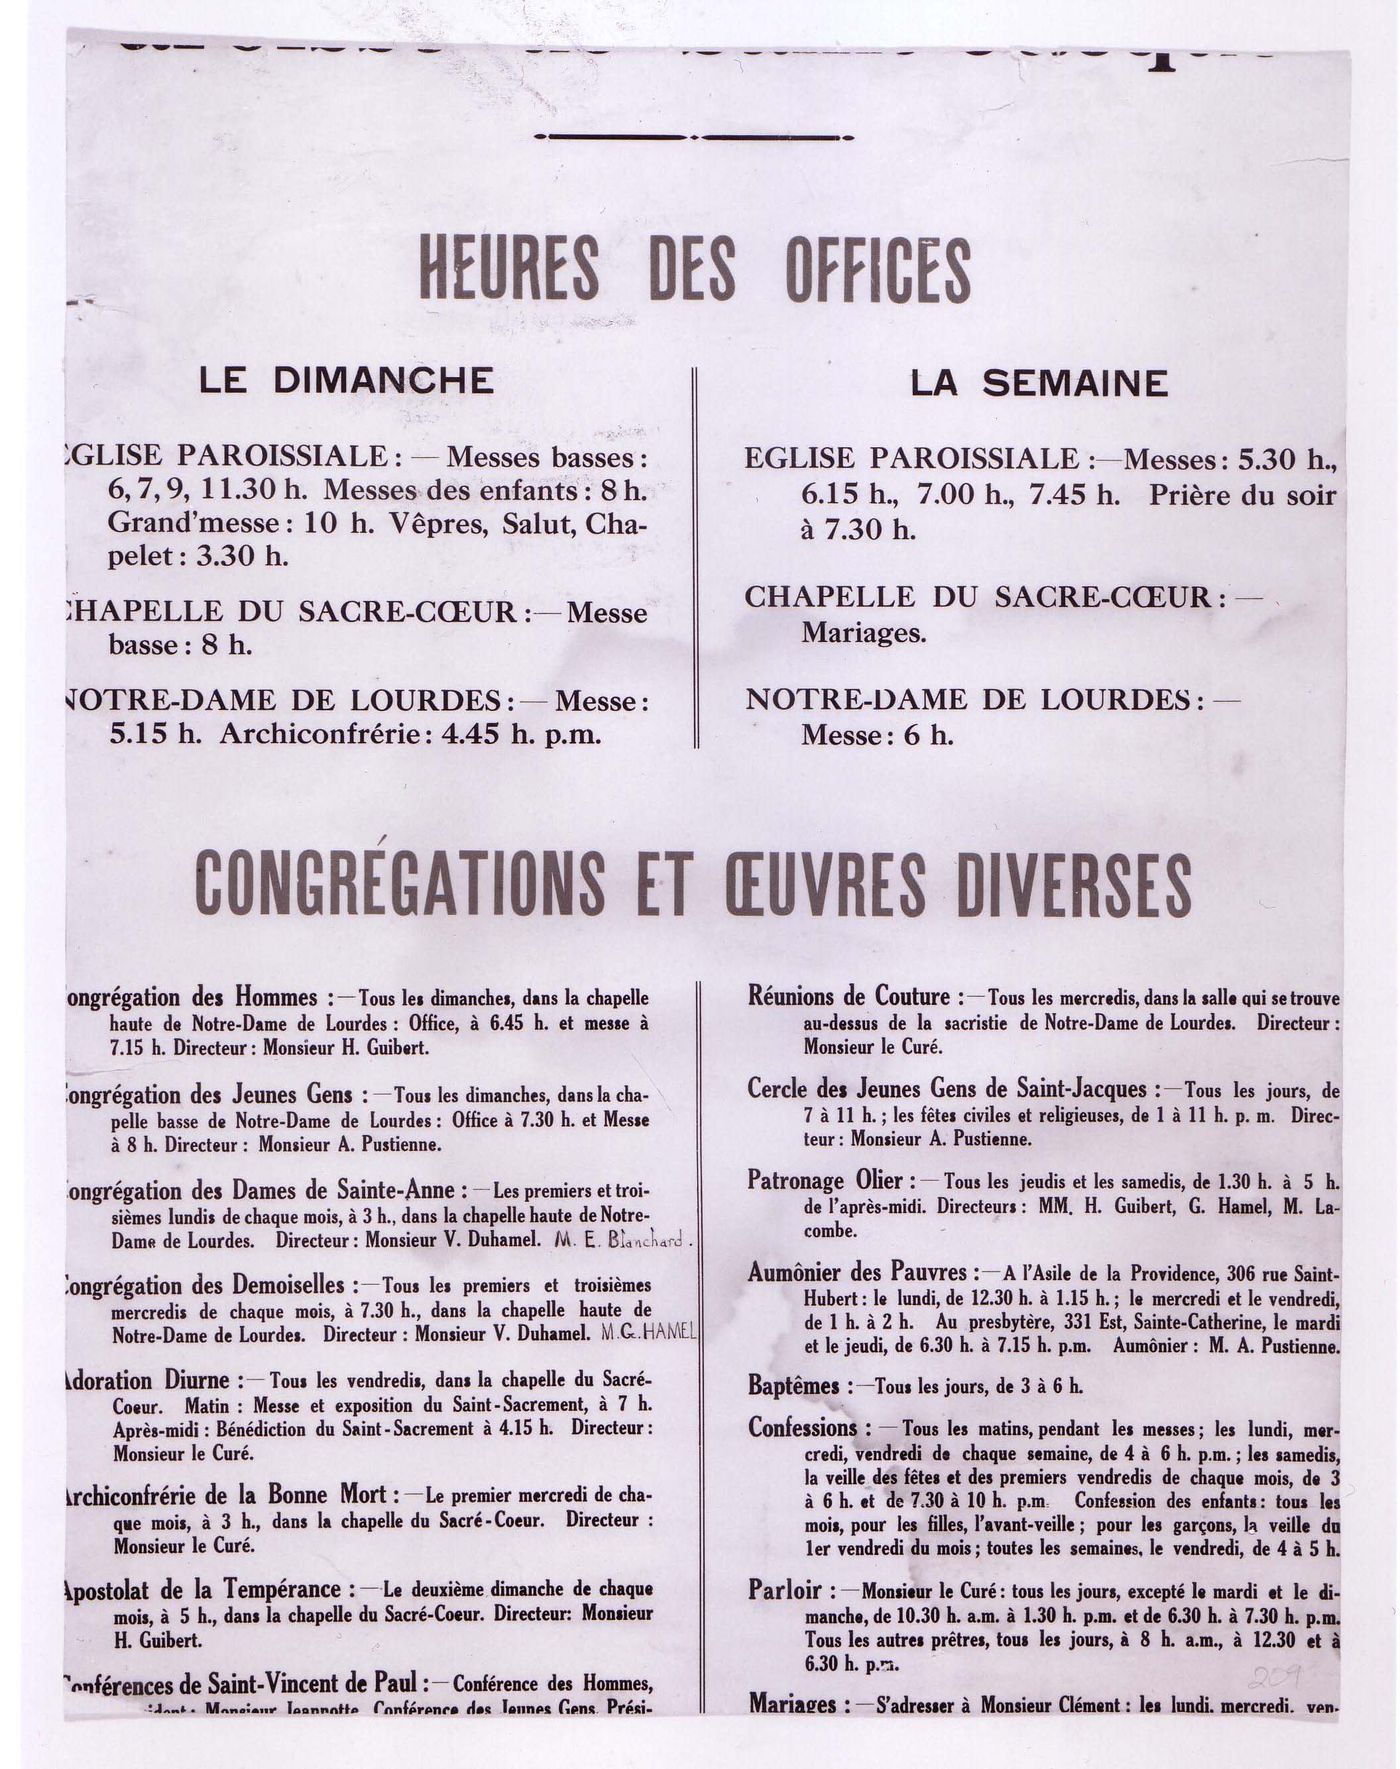 Cropped poster stating church office hours and hours of church services